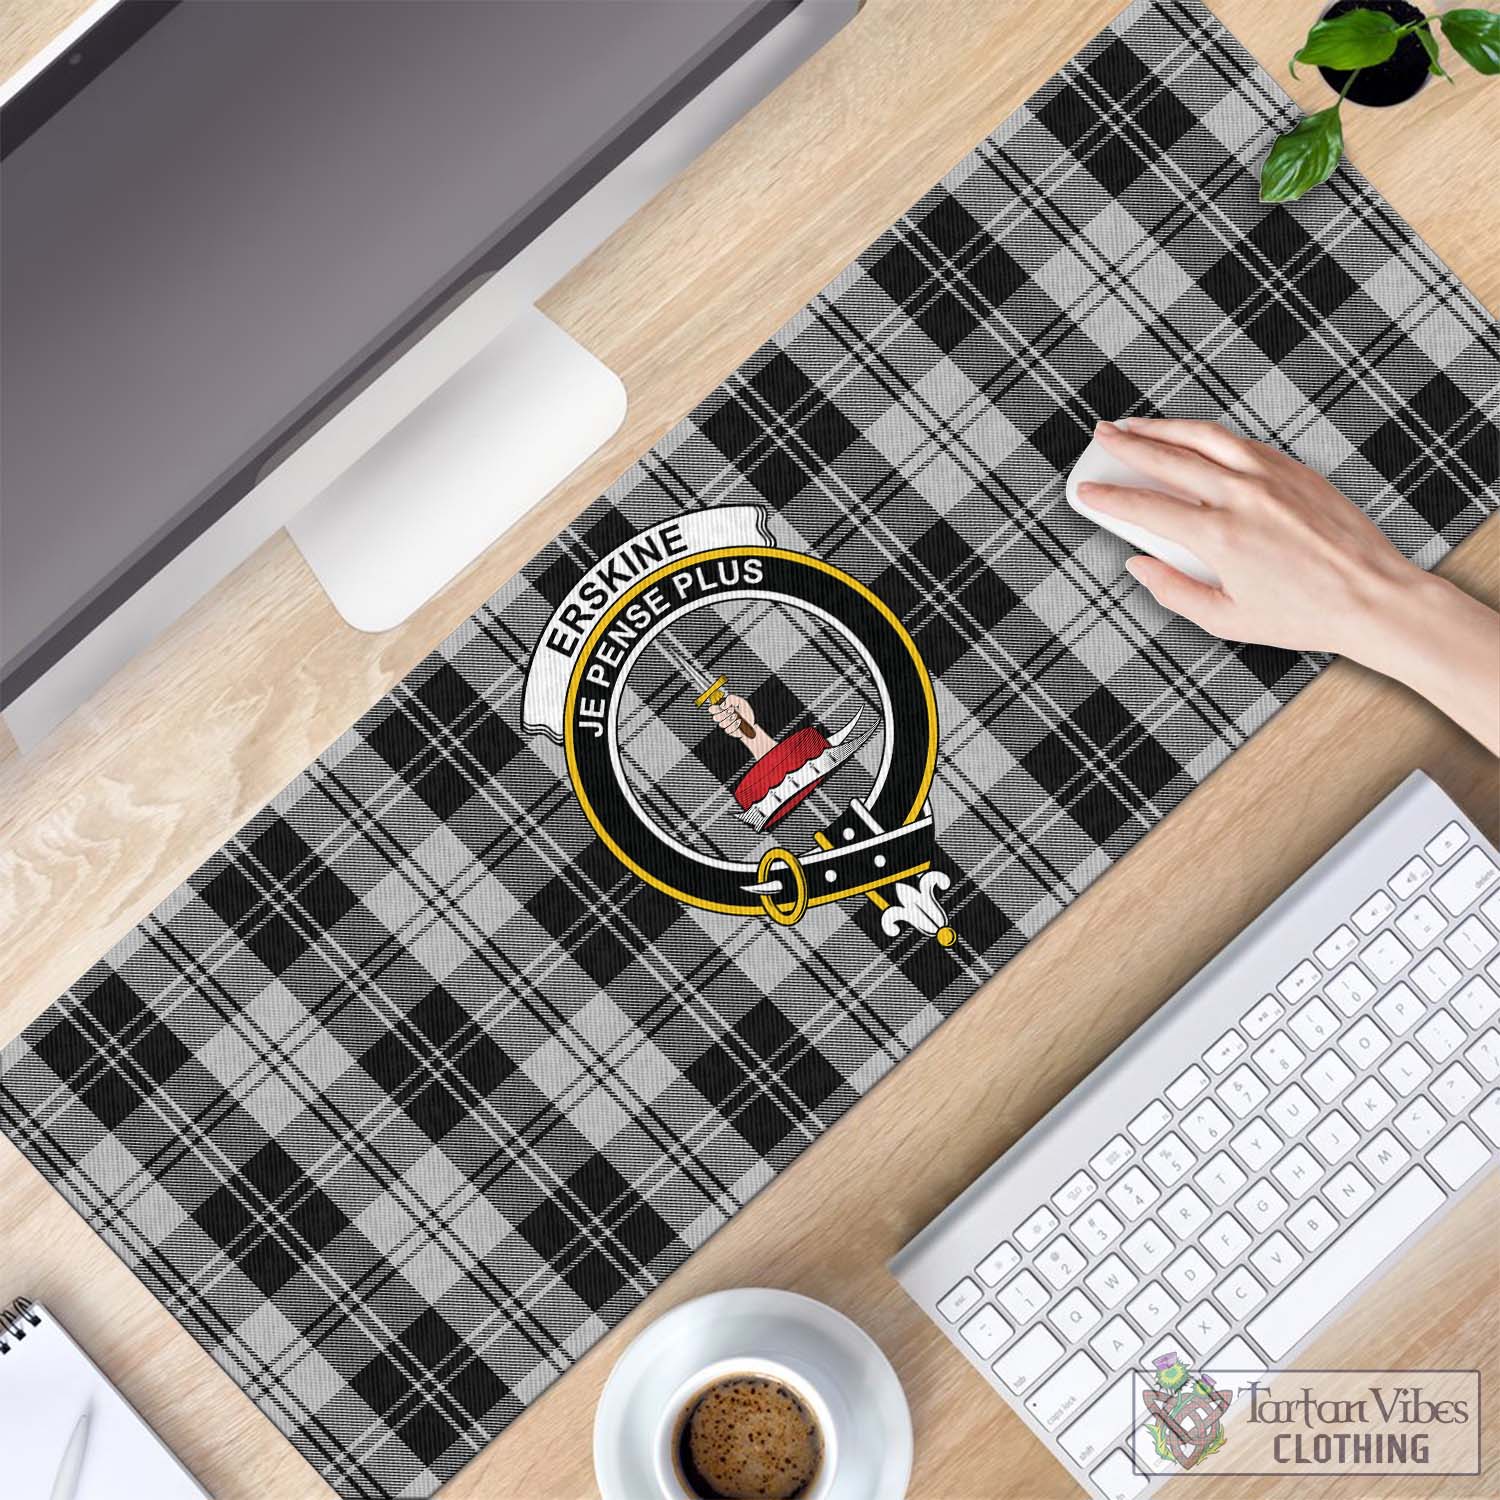 Tartan Vibes Clothing Erskine Black and White Tartan Mouse Pad with Family Crest